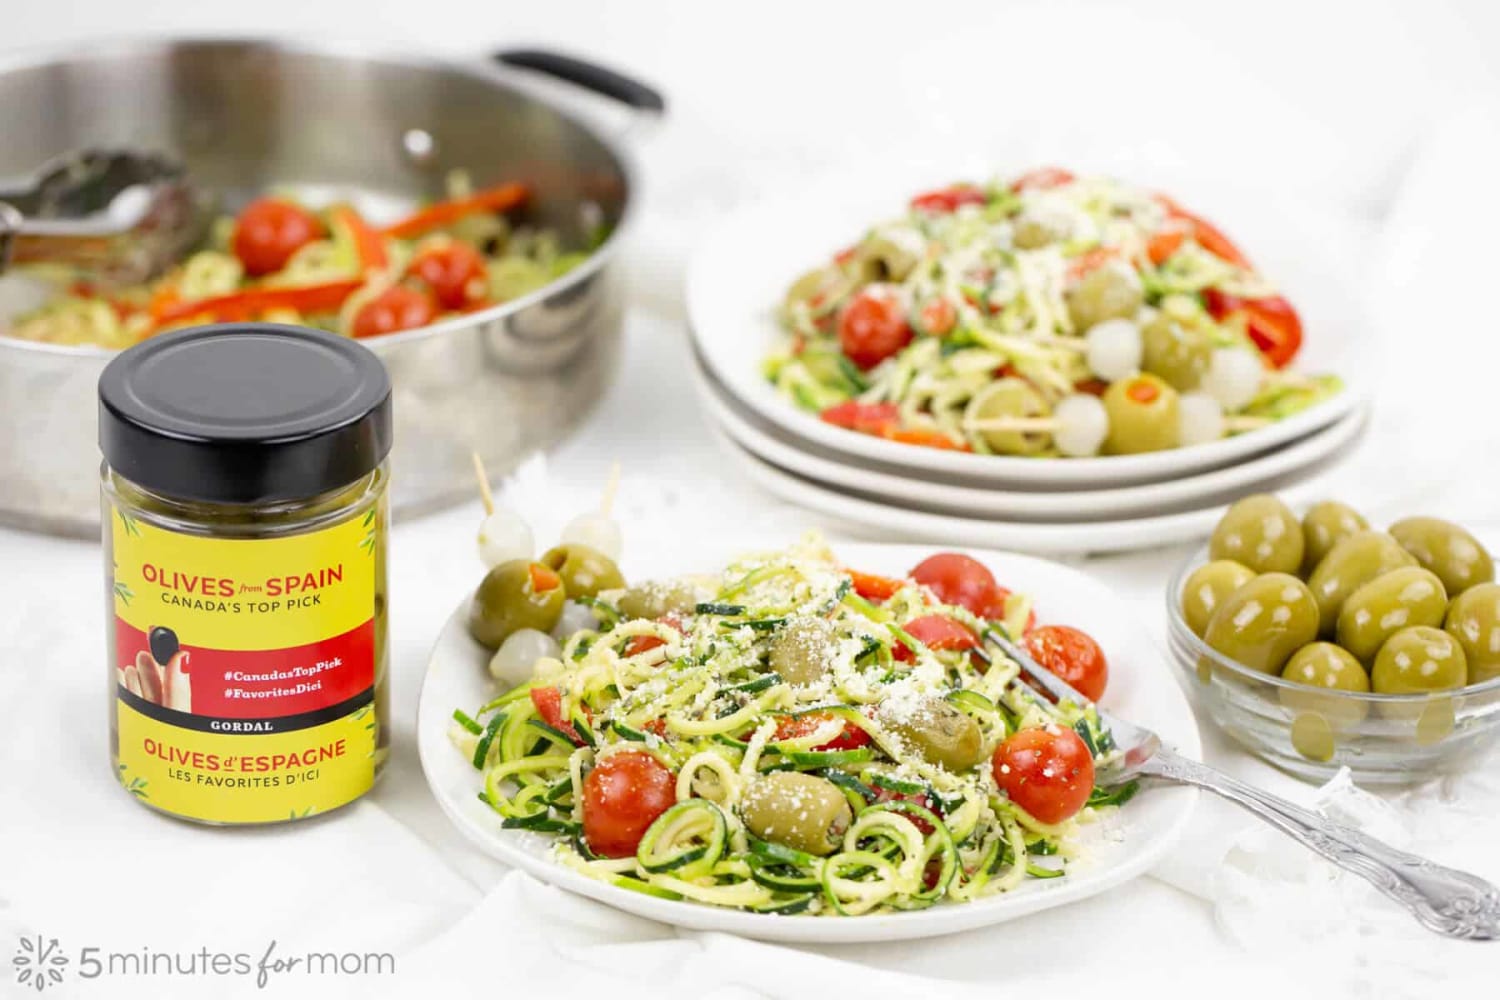 Zucchini Noodles with Olives from Spain